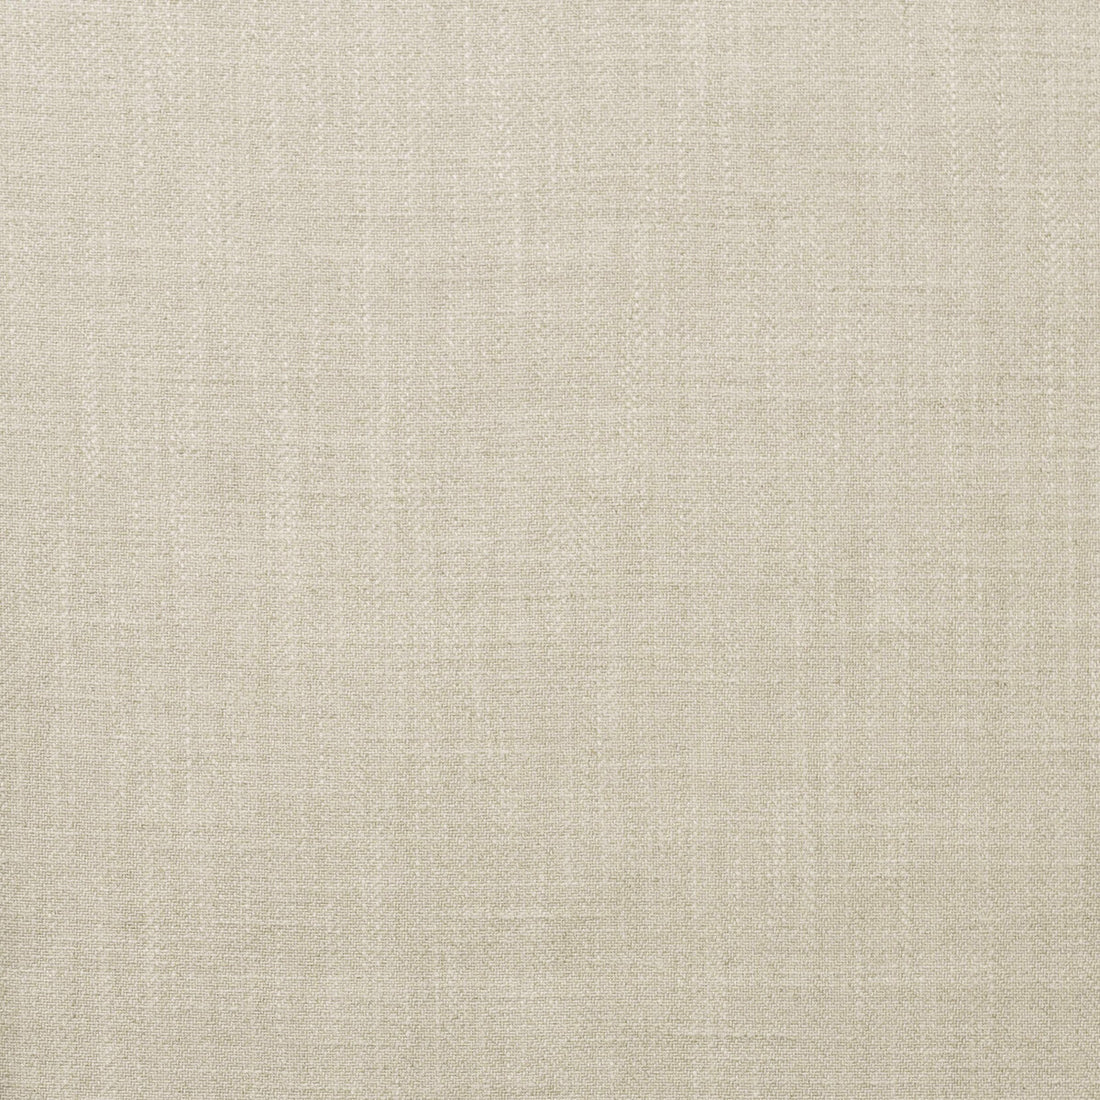 Caucasus fabric in linen color - pattern AM100345.16.0 - by Kravet Couture in the Andrew Martin Hindukush collection